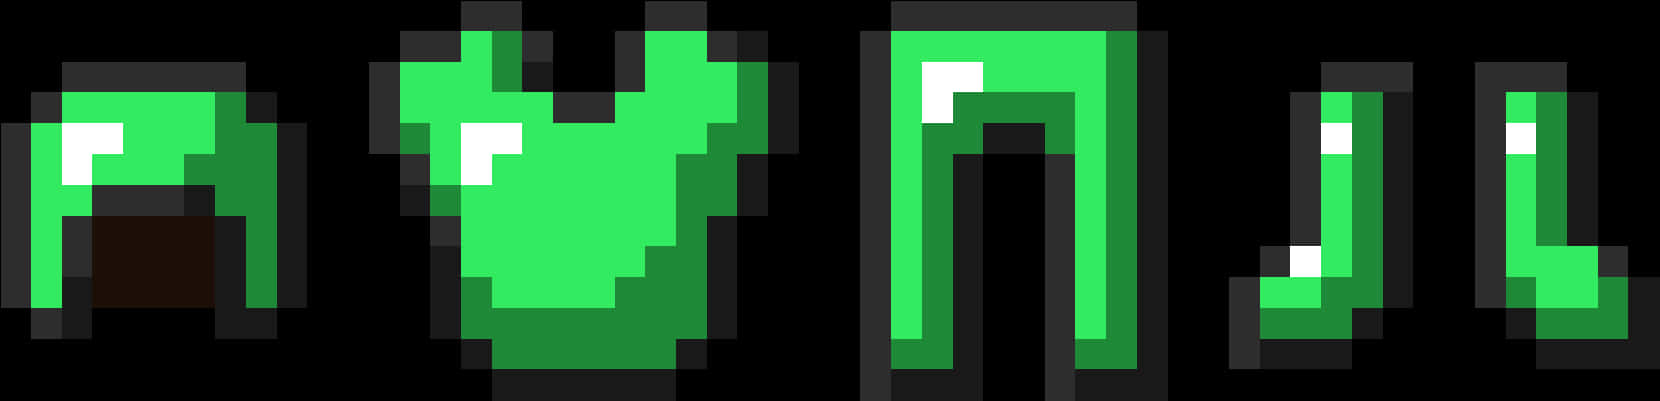 Minecraft_ Creeper_ Character_ Skin_ Parts PNG